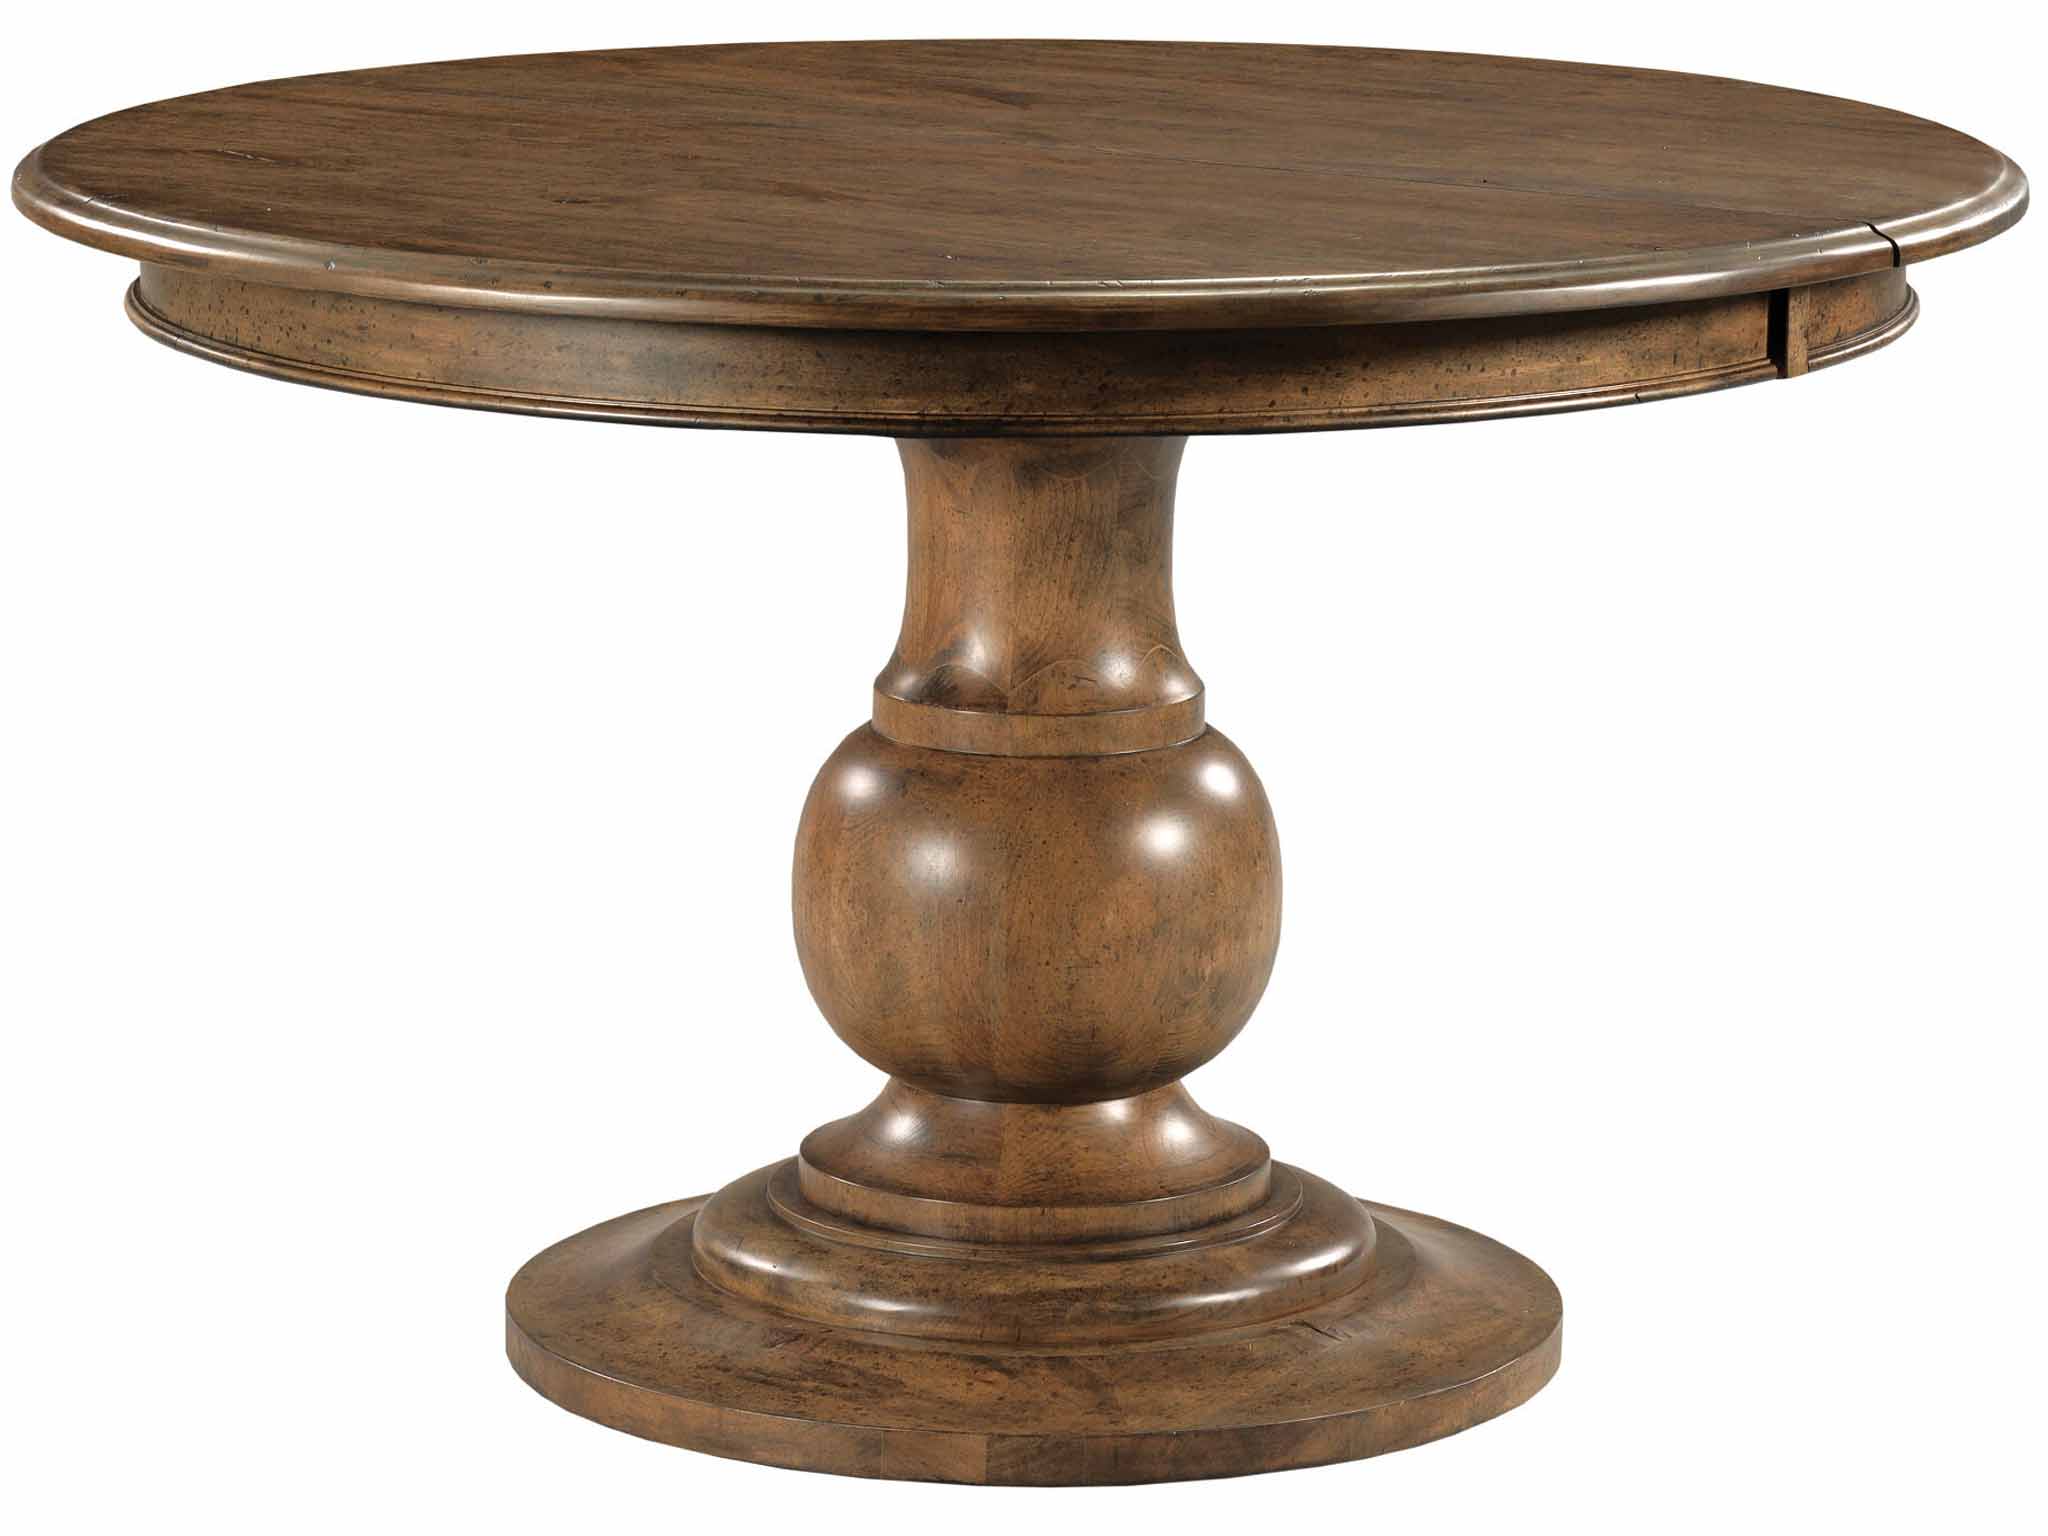 Kincaid 024-701P Ansley Whitson Round Pedestal Dining Table Complete